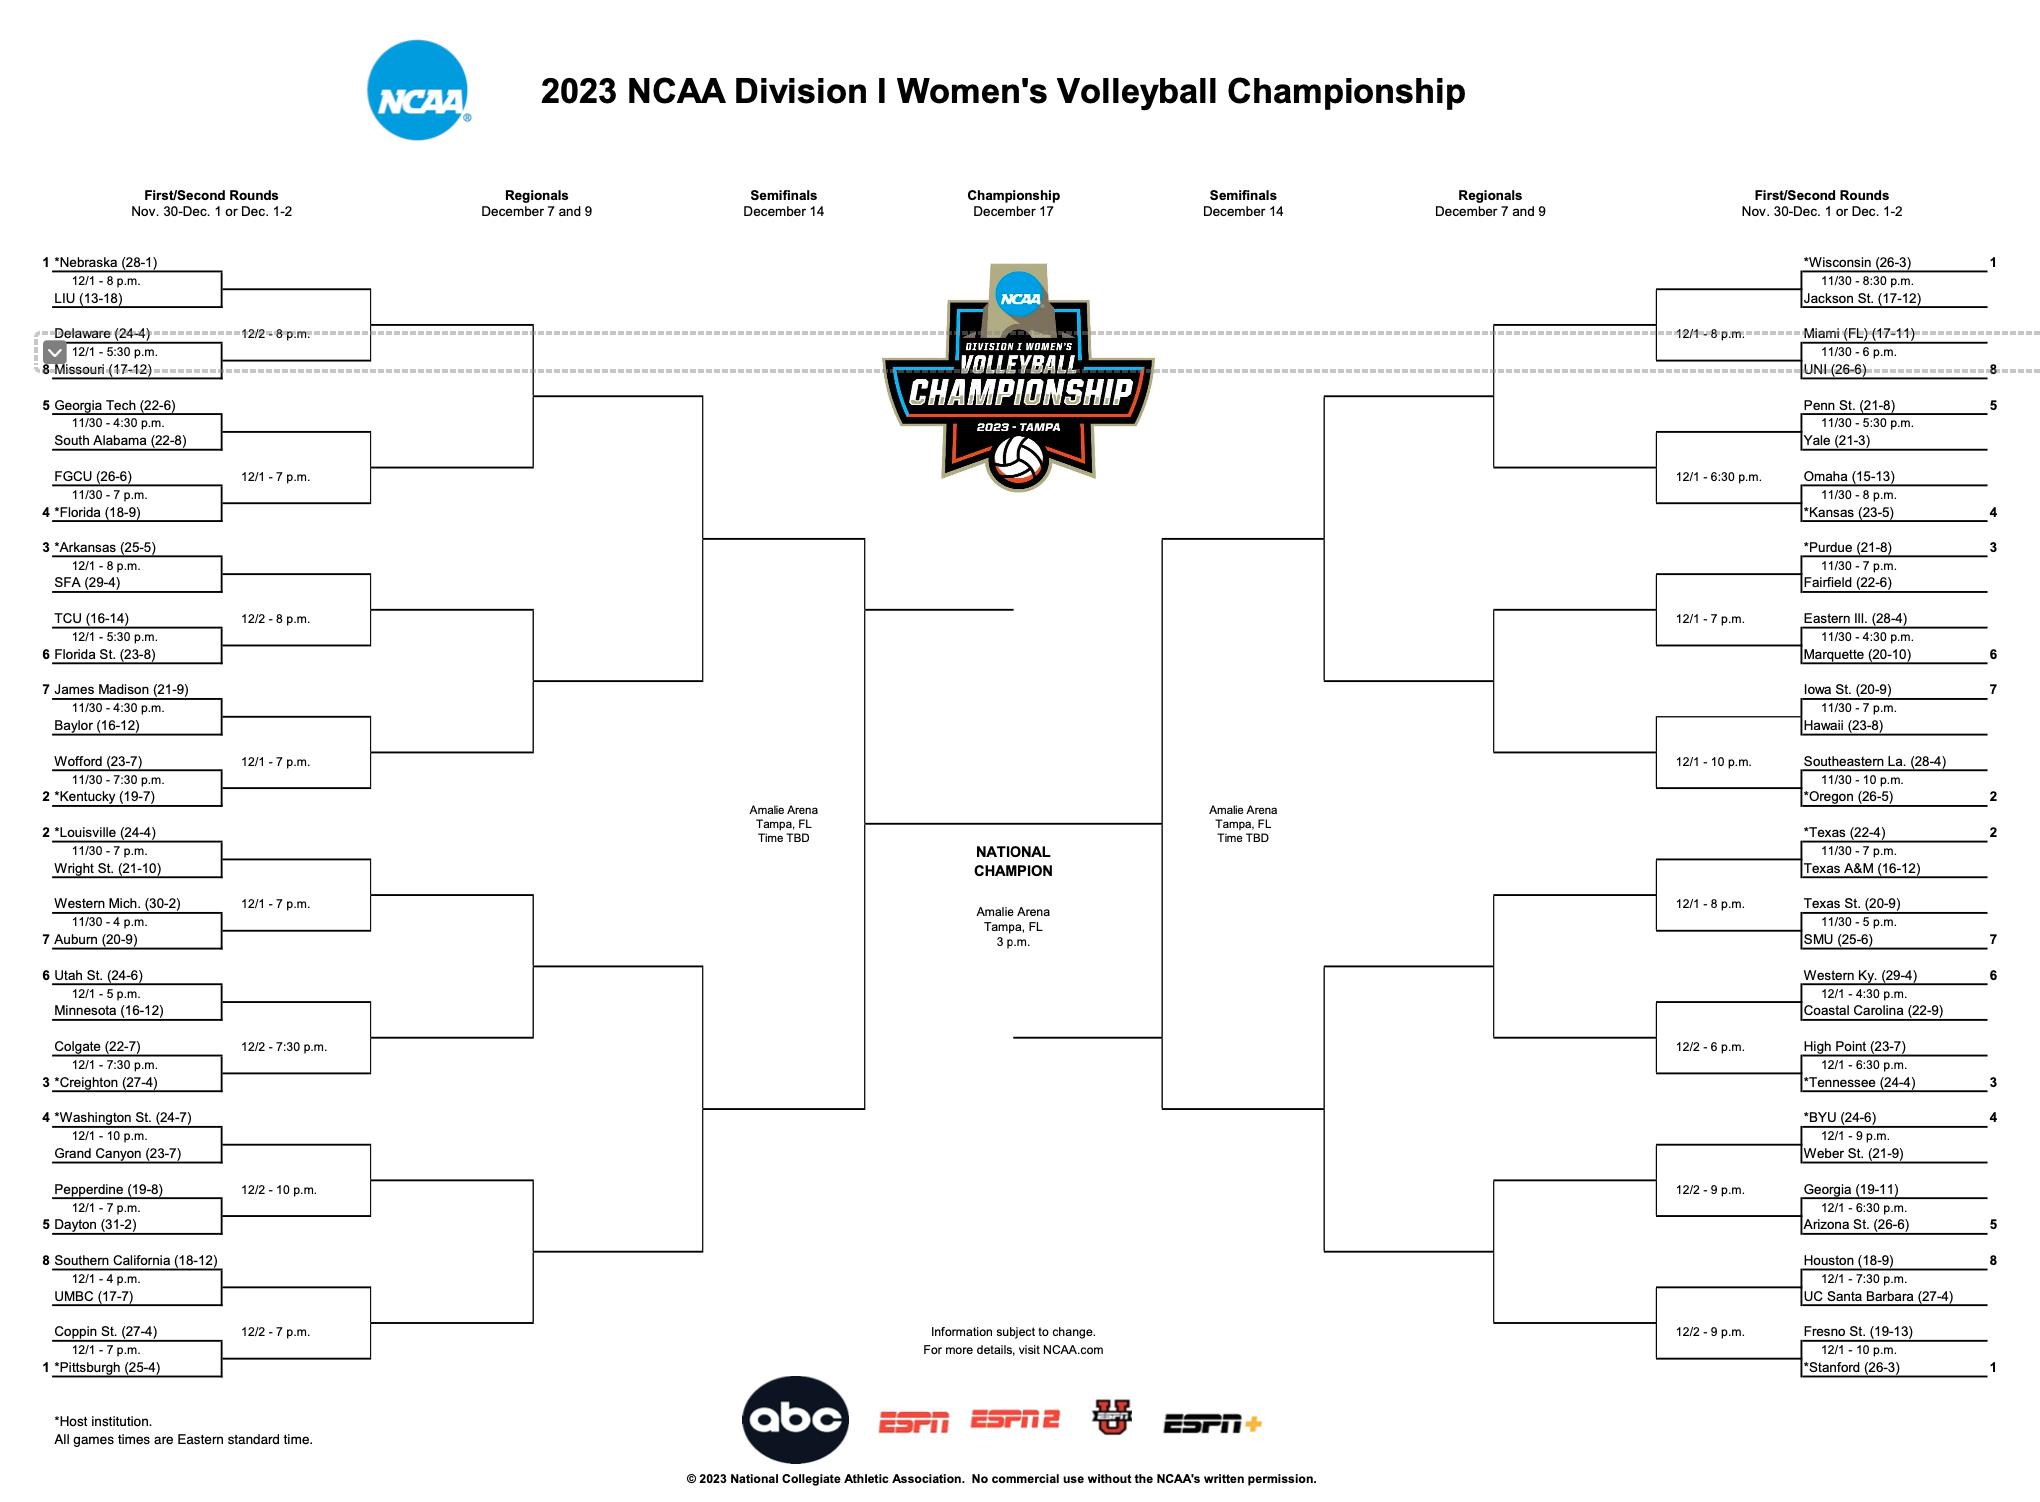 Printable Bracket For 2023 Division 1 Women's Volleyball Championship